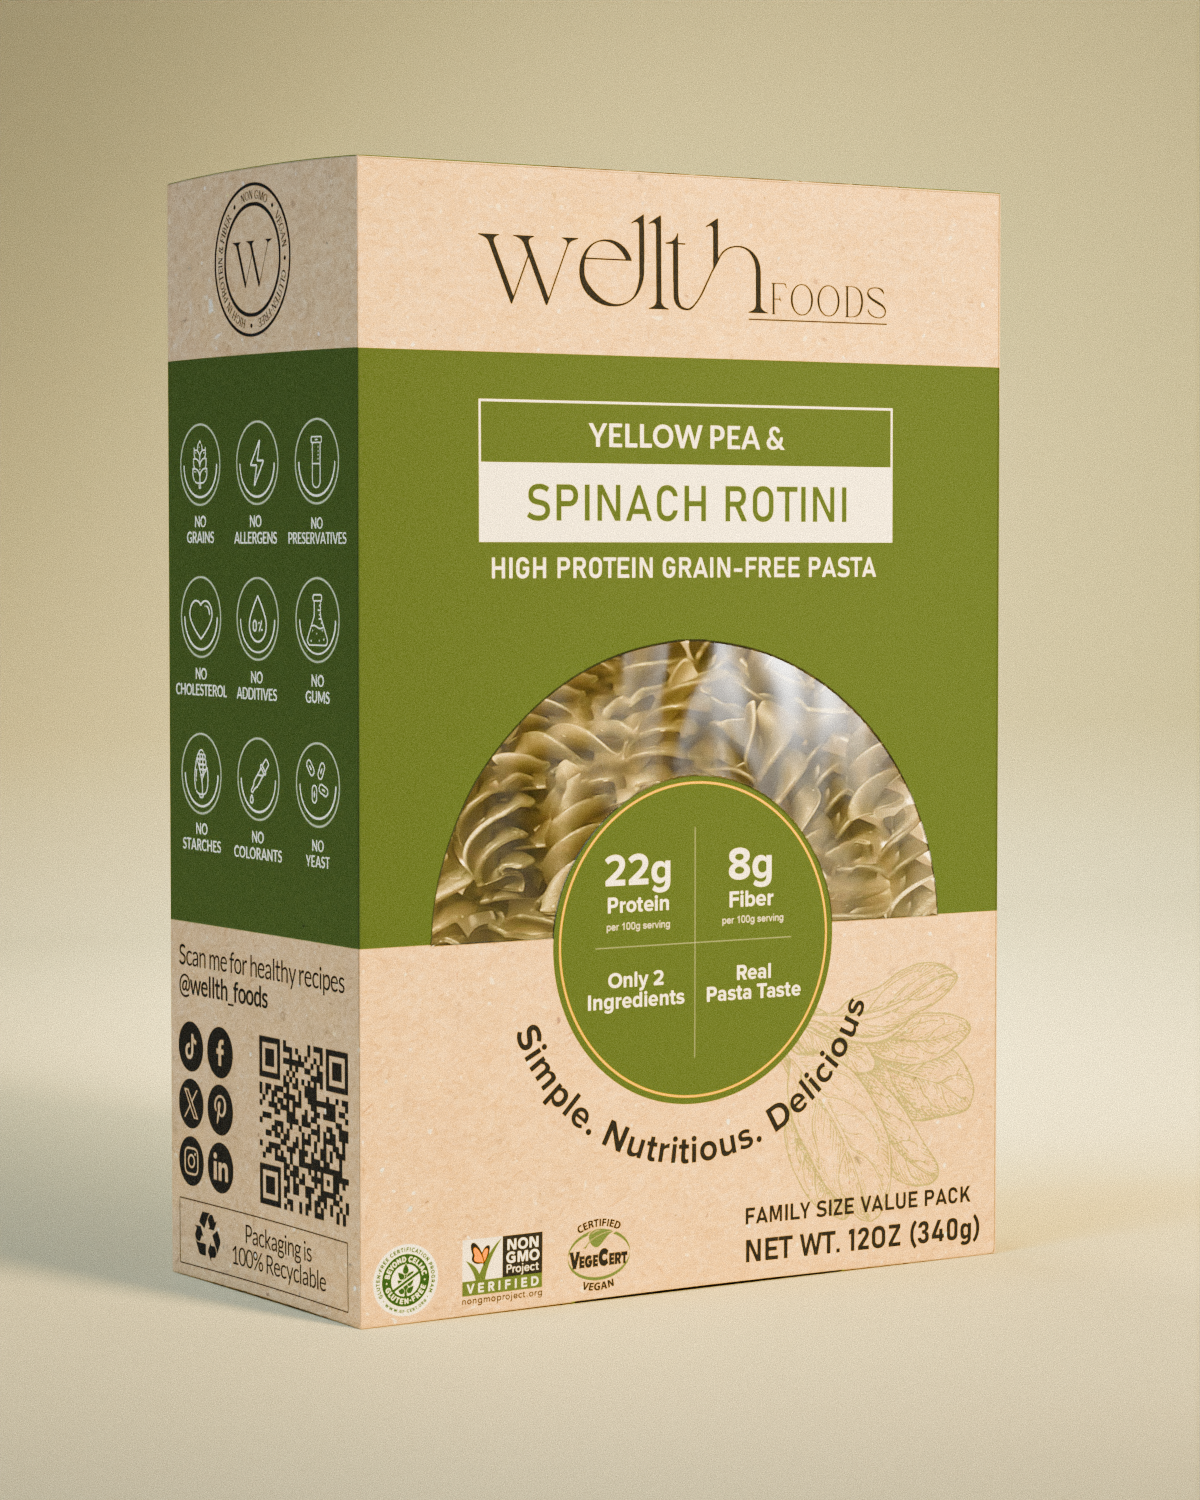 Spinach rotini packaging high protein grain-free pasta